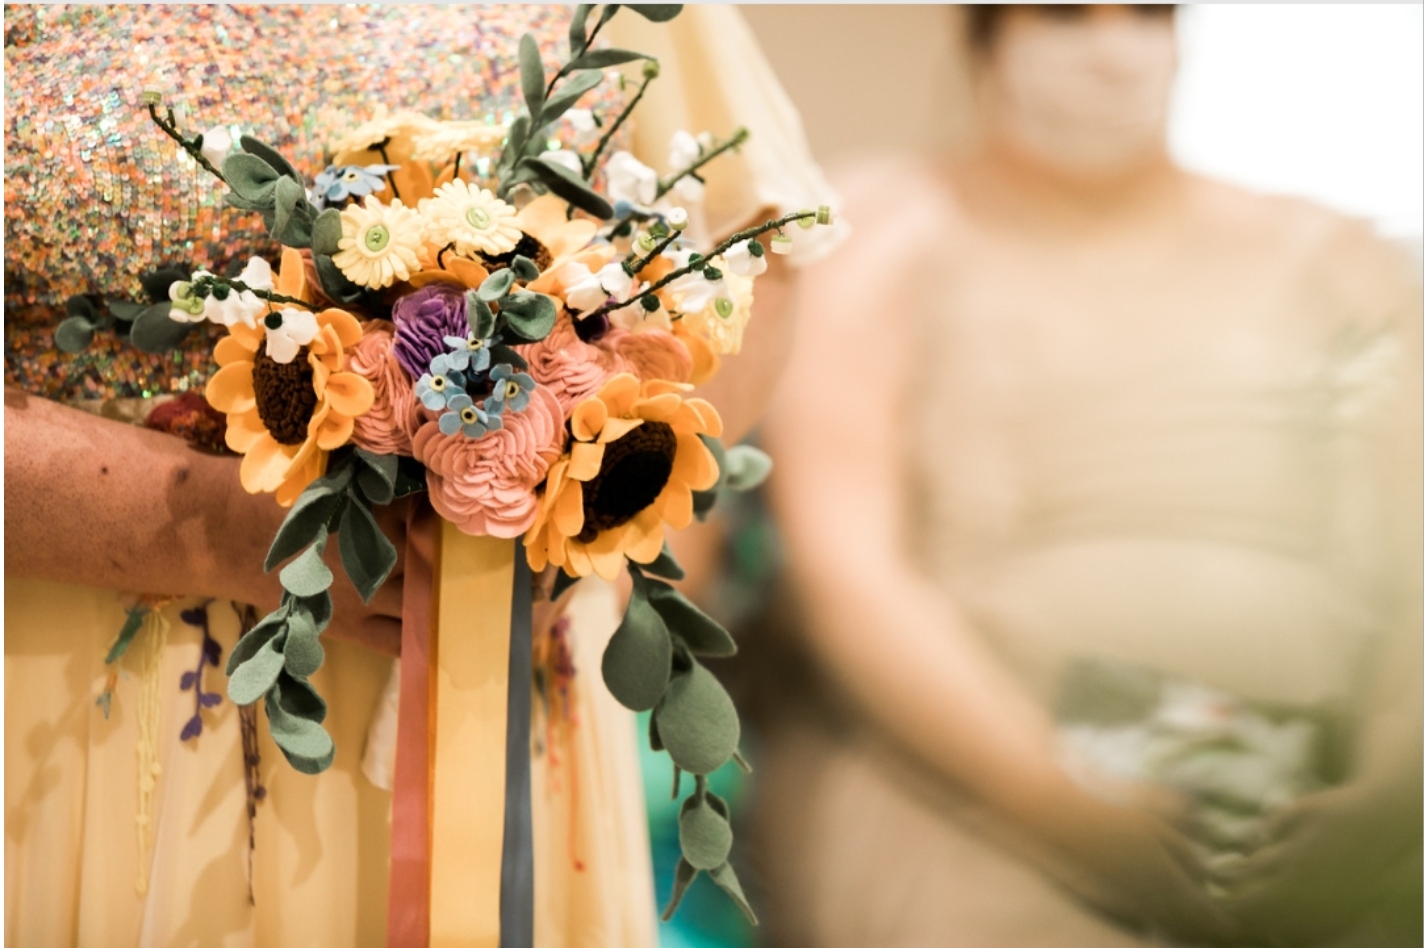 charlotte laurie designs floral alternative wedding bouquet by hannah smith chilton photography